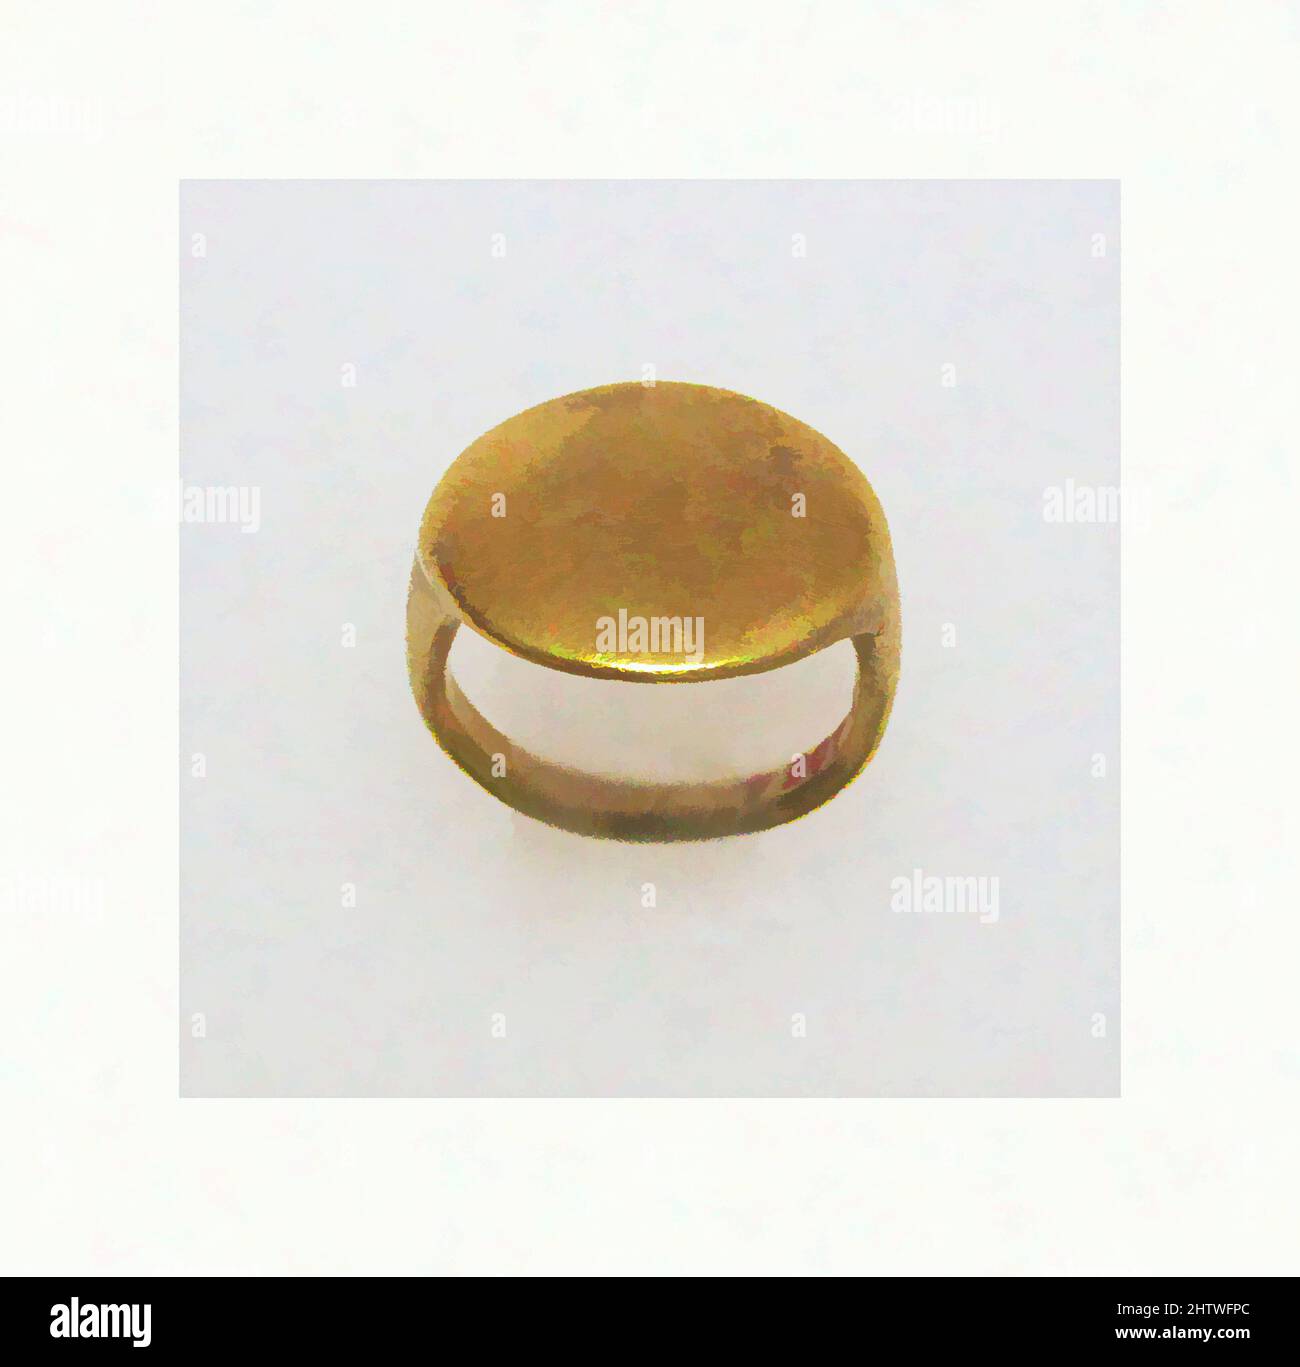 Art inspired by Ring, Gold, Other: 3/4 × 3/4 × 5/8 in. (1.9 × 2 × 1.6 cm), Gold and Silver, Classic works modernized by Artotop with a splash of modernity. Shapes, color and value, eye-catching visual impact on art. Emotions through freedom of artworks in a contemporary way. A timeless message pursuing a wildly creative new direction. Artists turning to the digital medium and creating the Artotop NFT Stock Photo